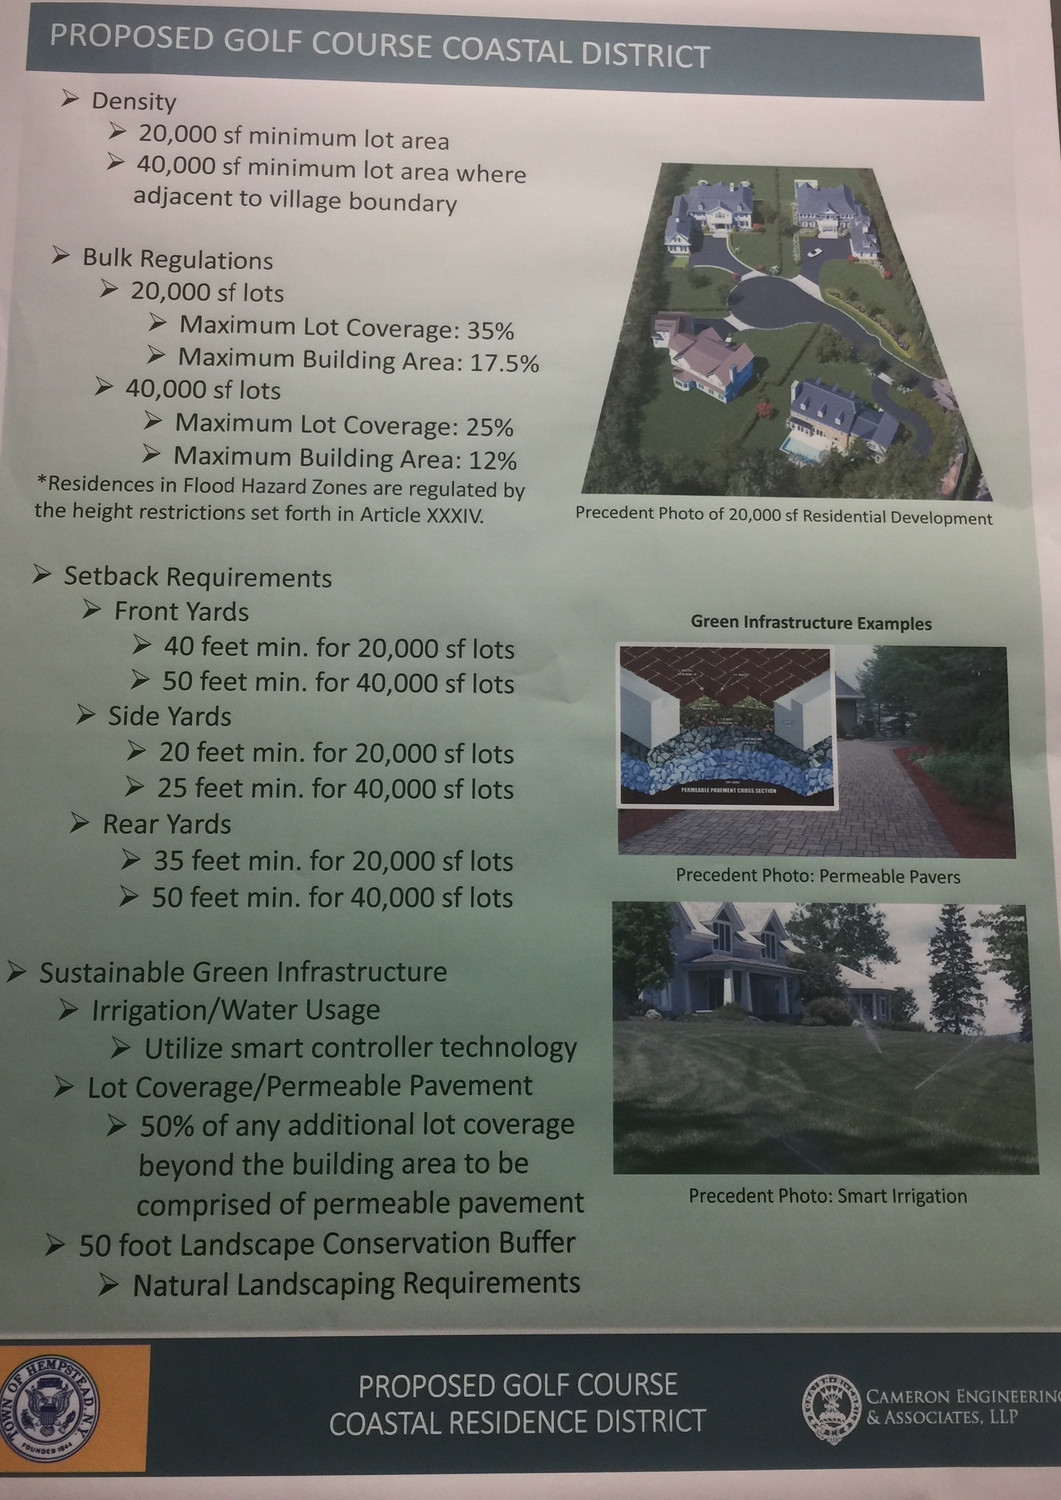 The proposed town Golf Course Coastal Residence Overlay District would restrict building on golf courses situated on what is considered environmentally sensitive land.